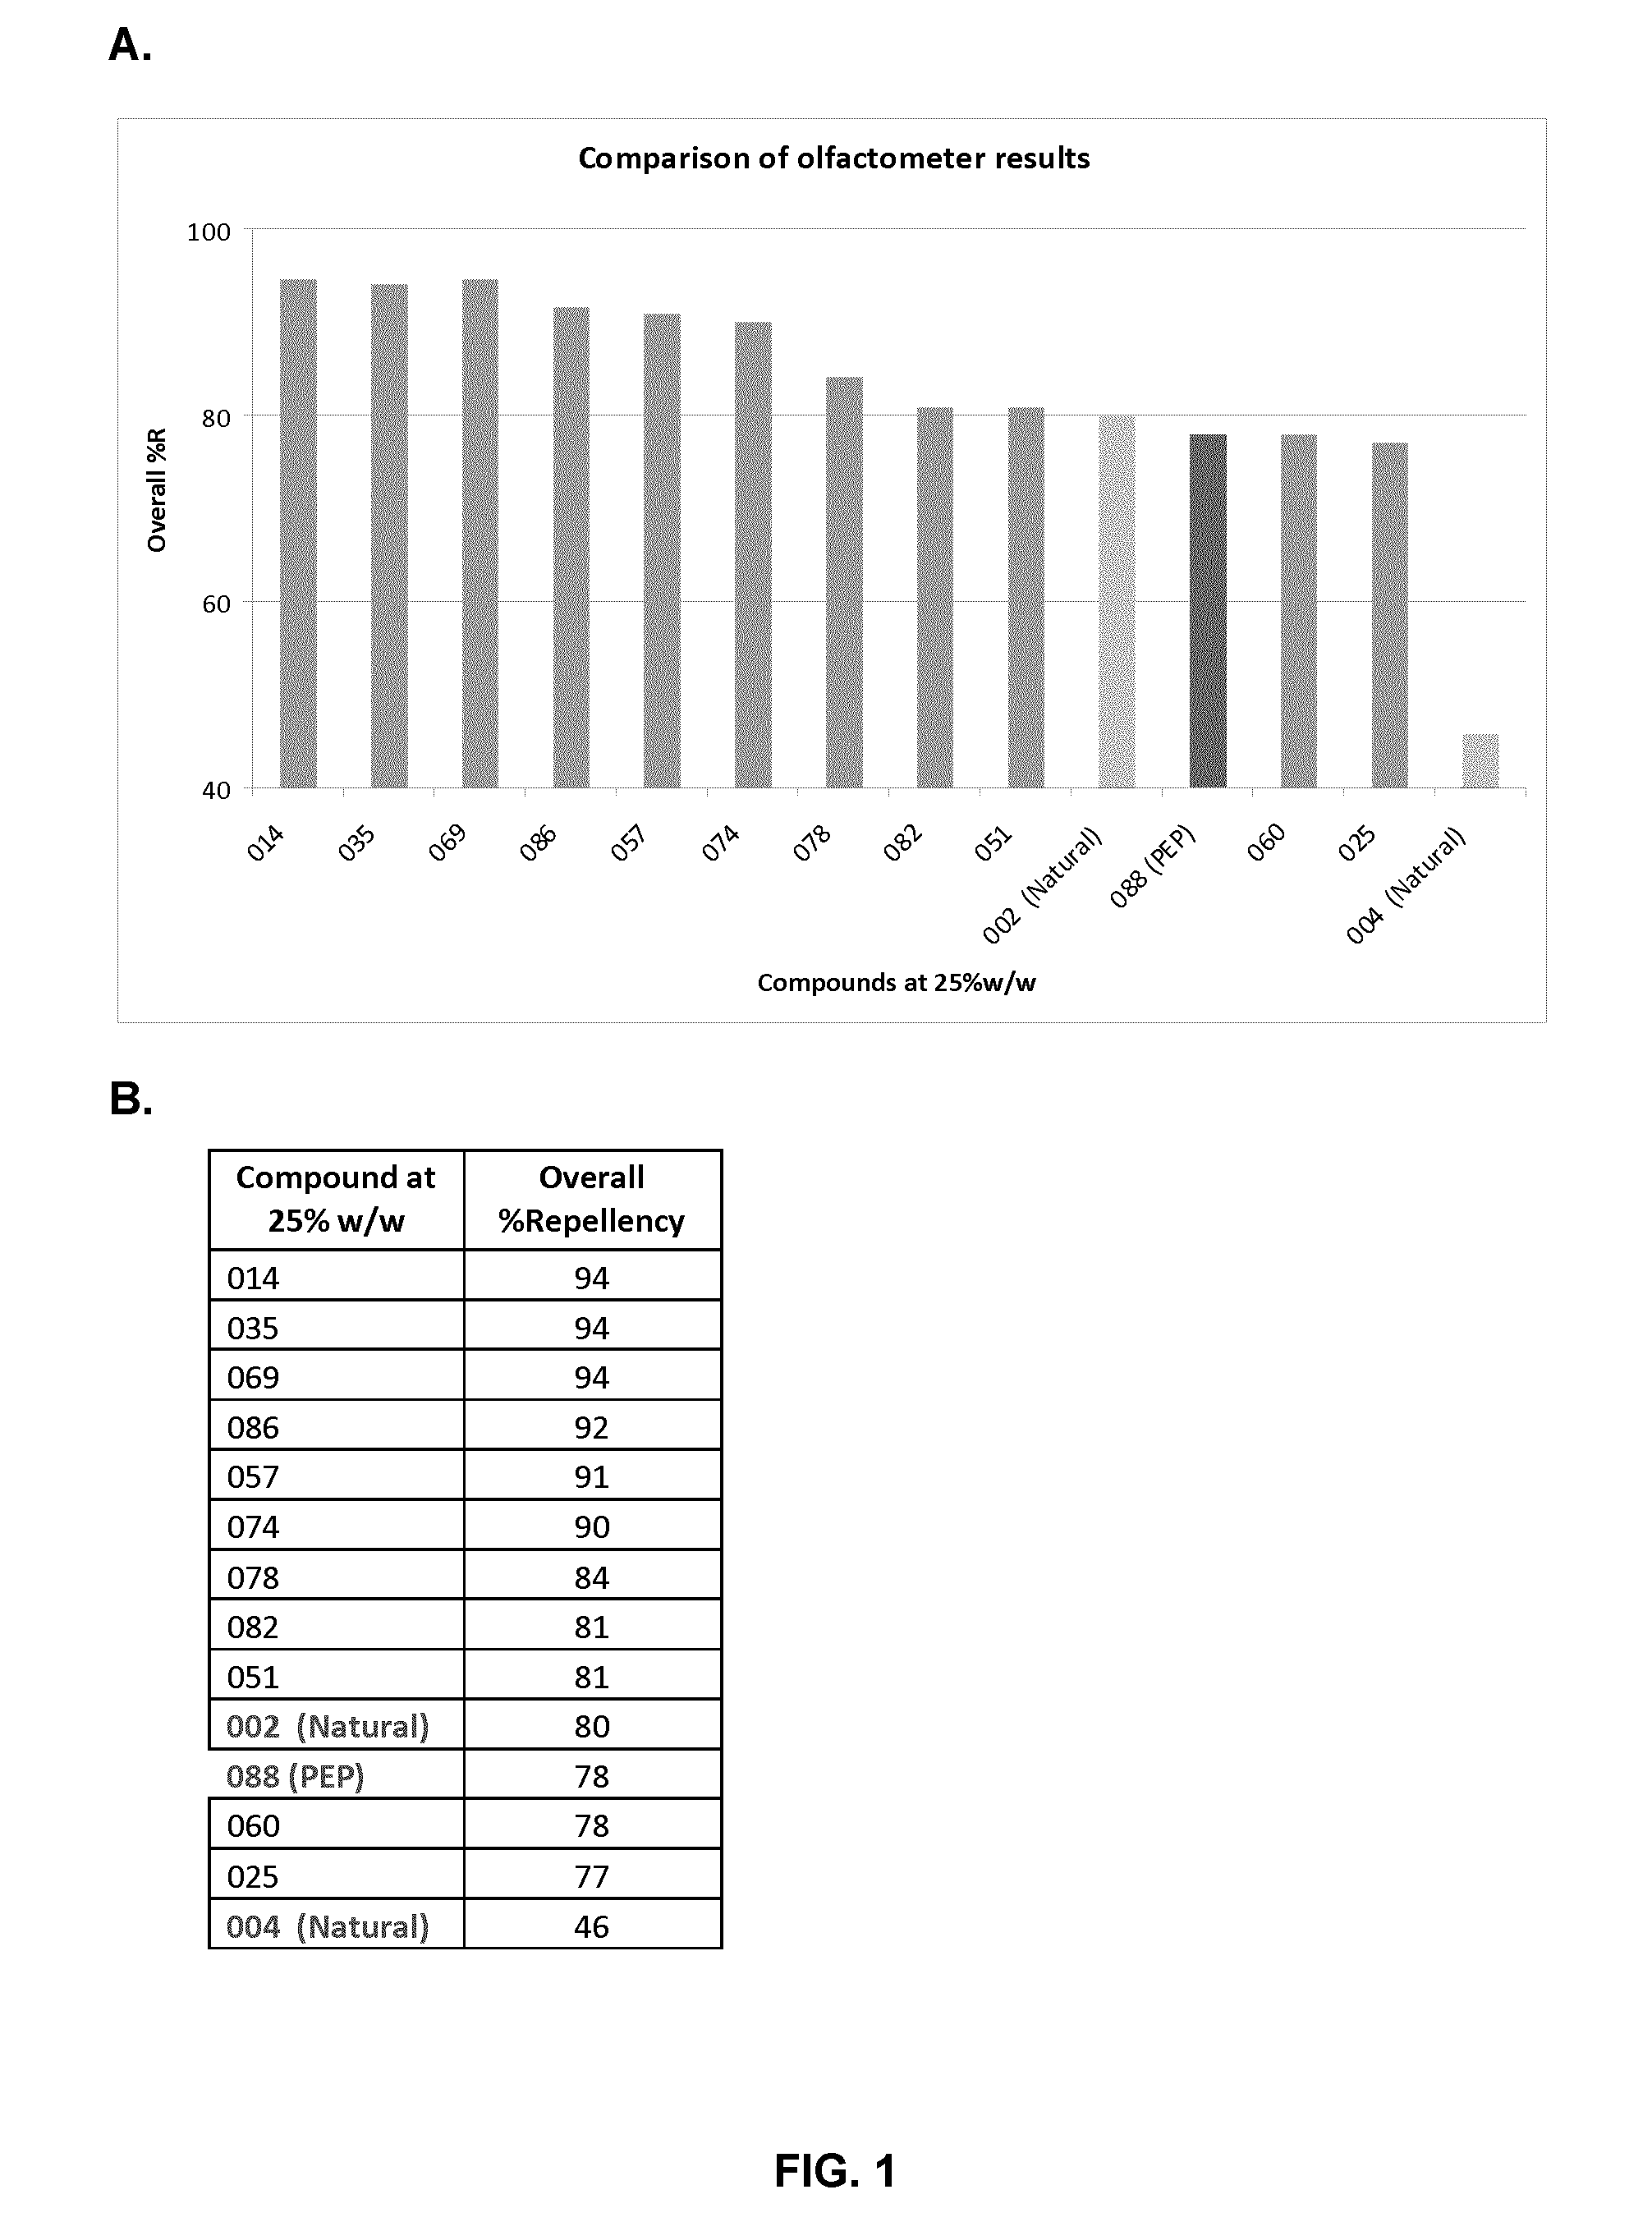 Carbonyl containing compounds for controlling and repelling cimicidae populations